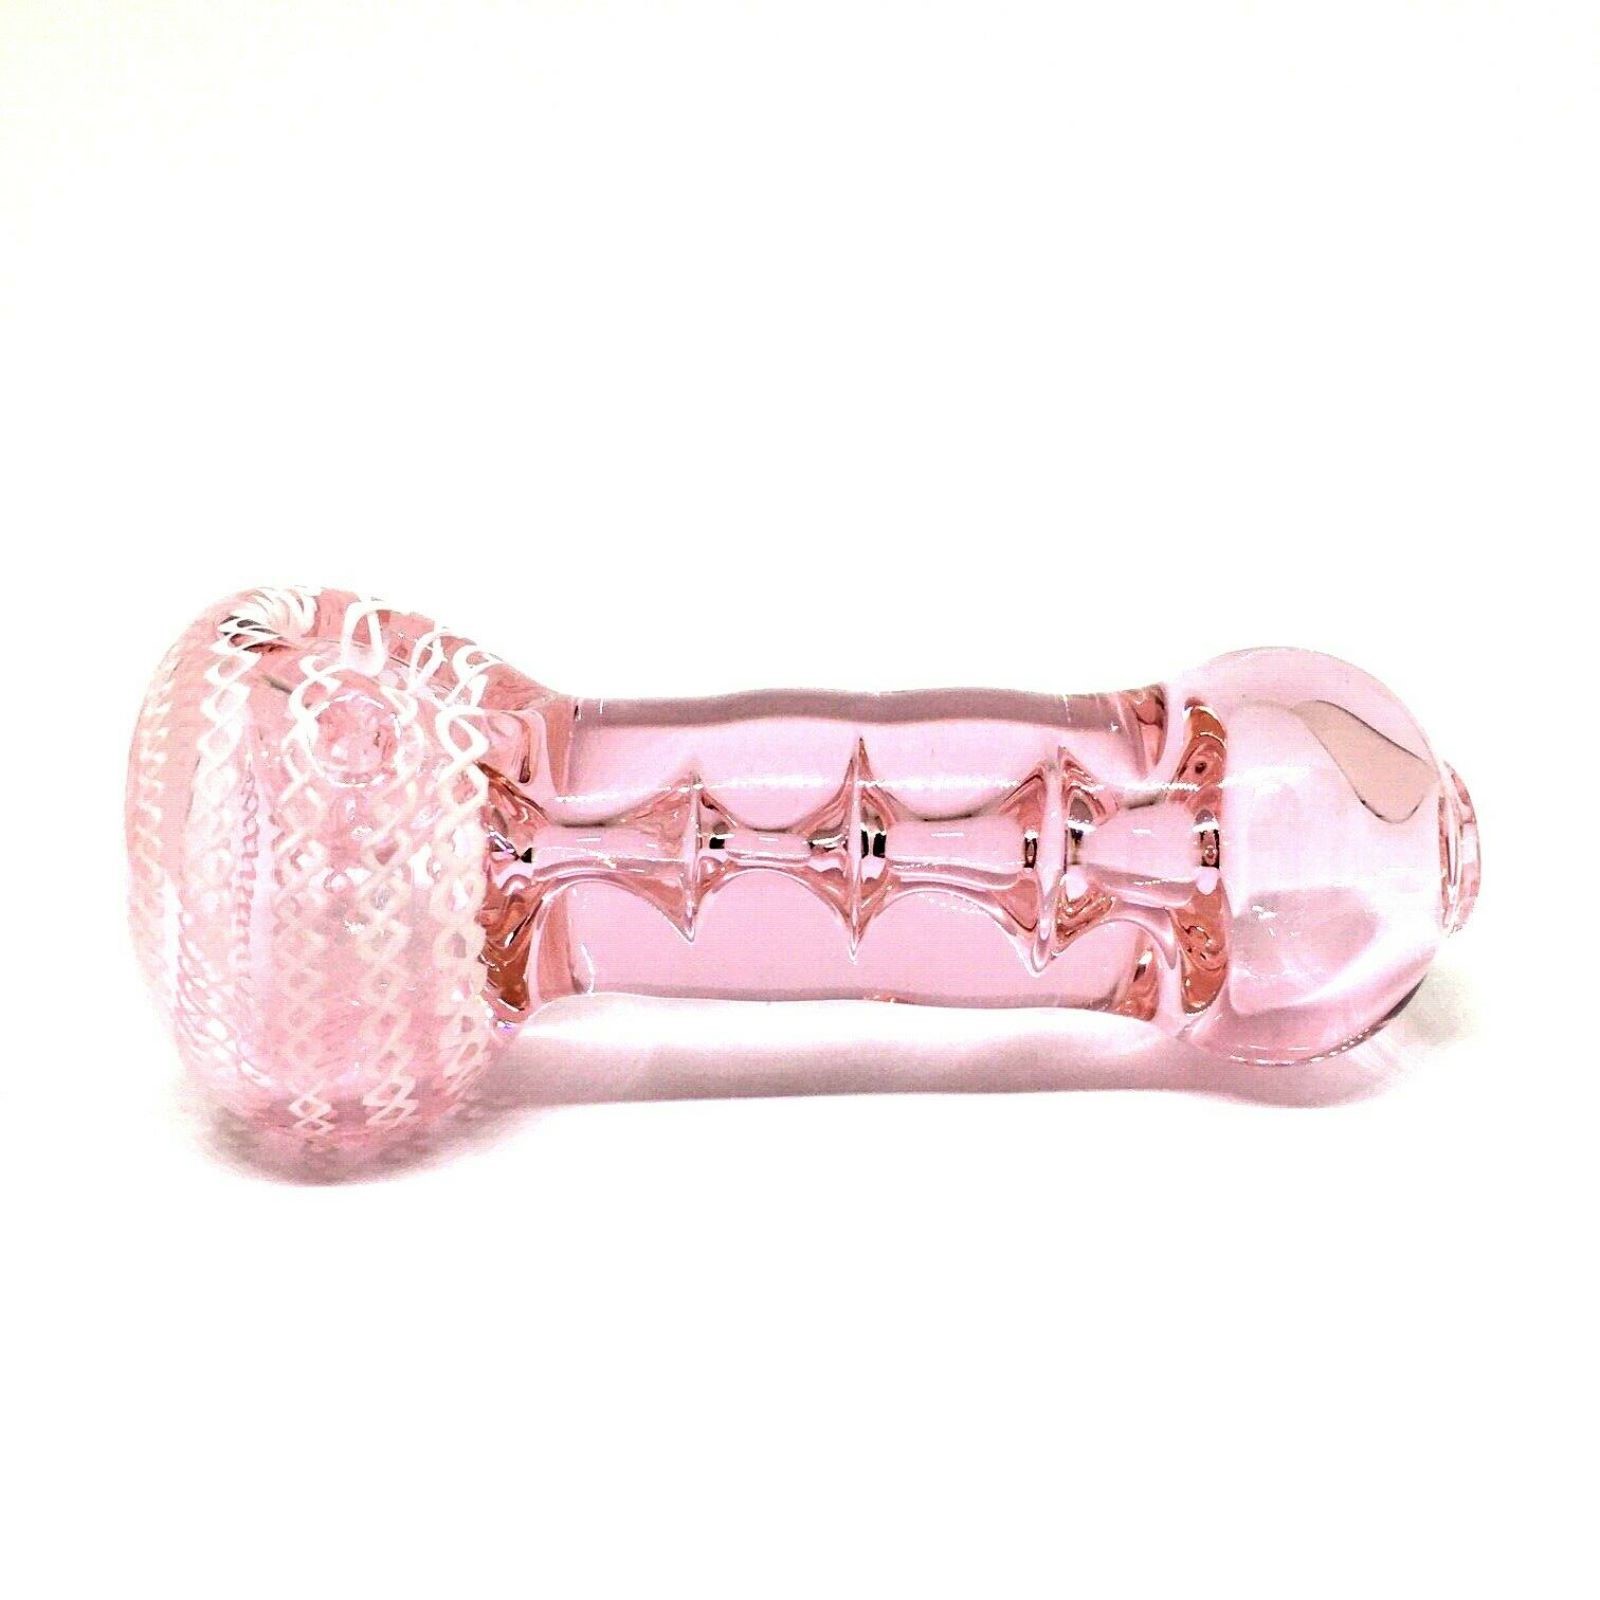 4 Inch Pink Hand Pipes  Twist Style Glass Smoking Hand Pipes - G420glass